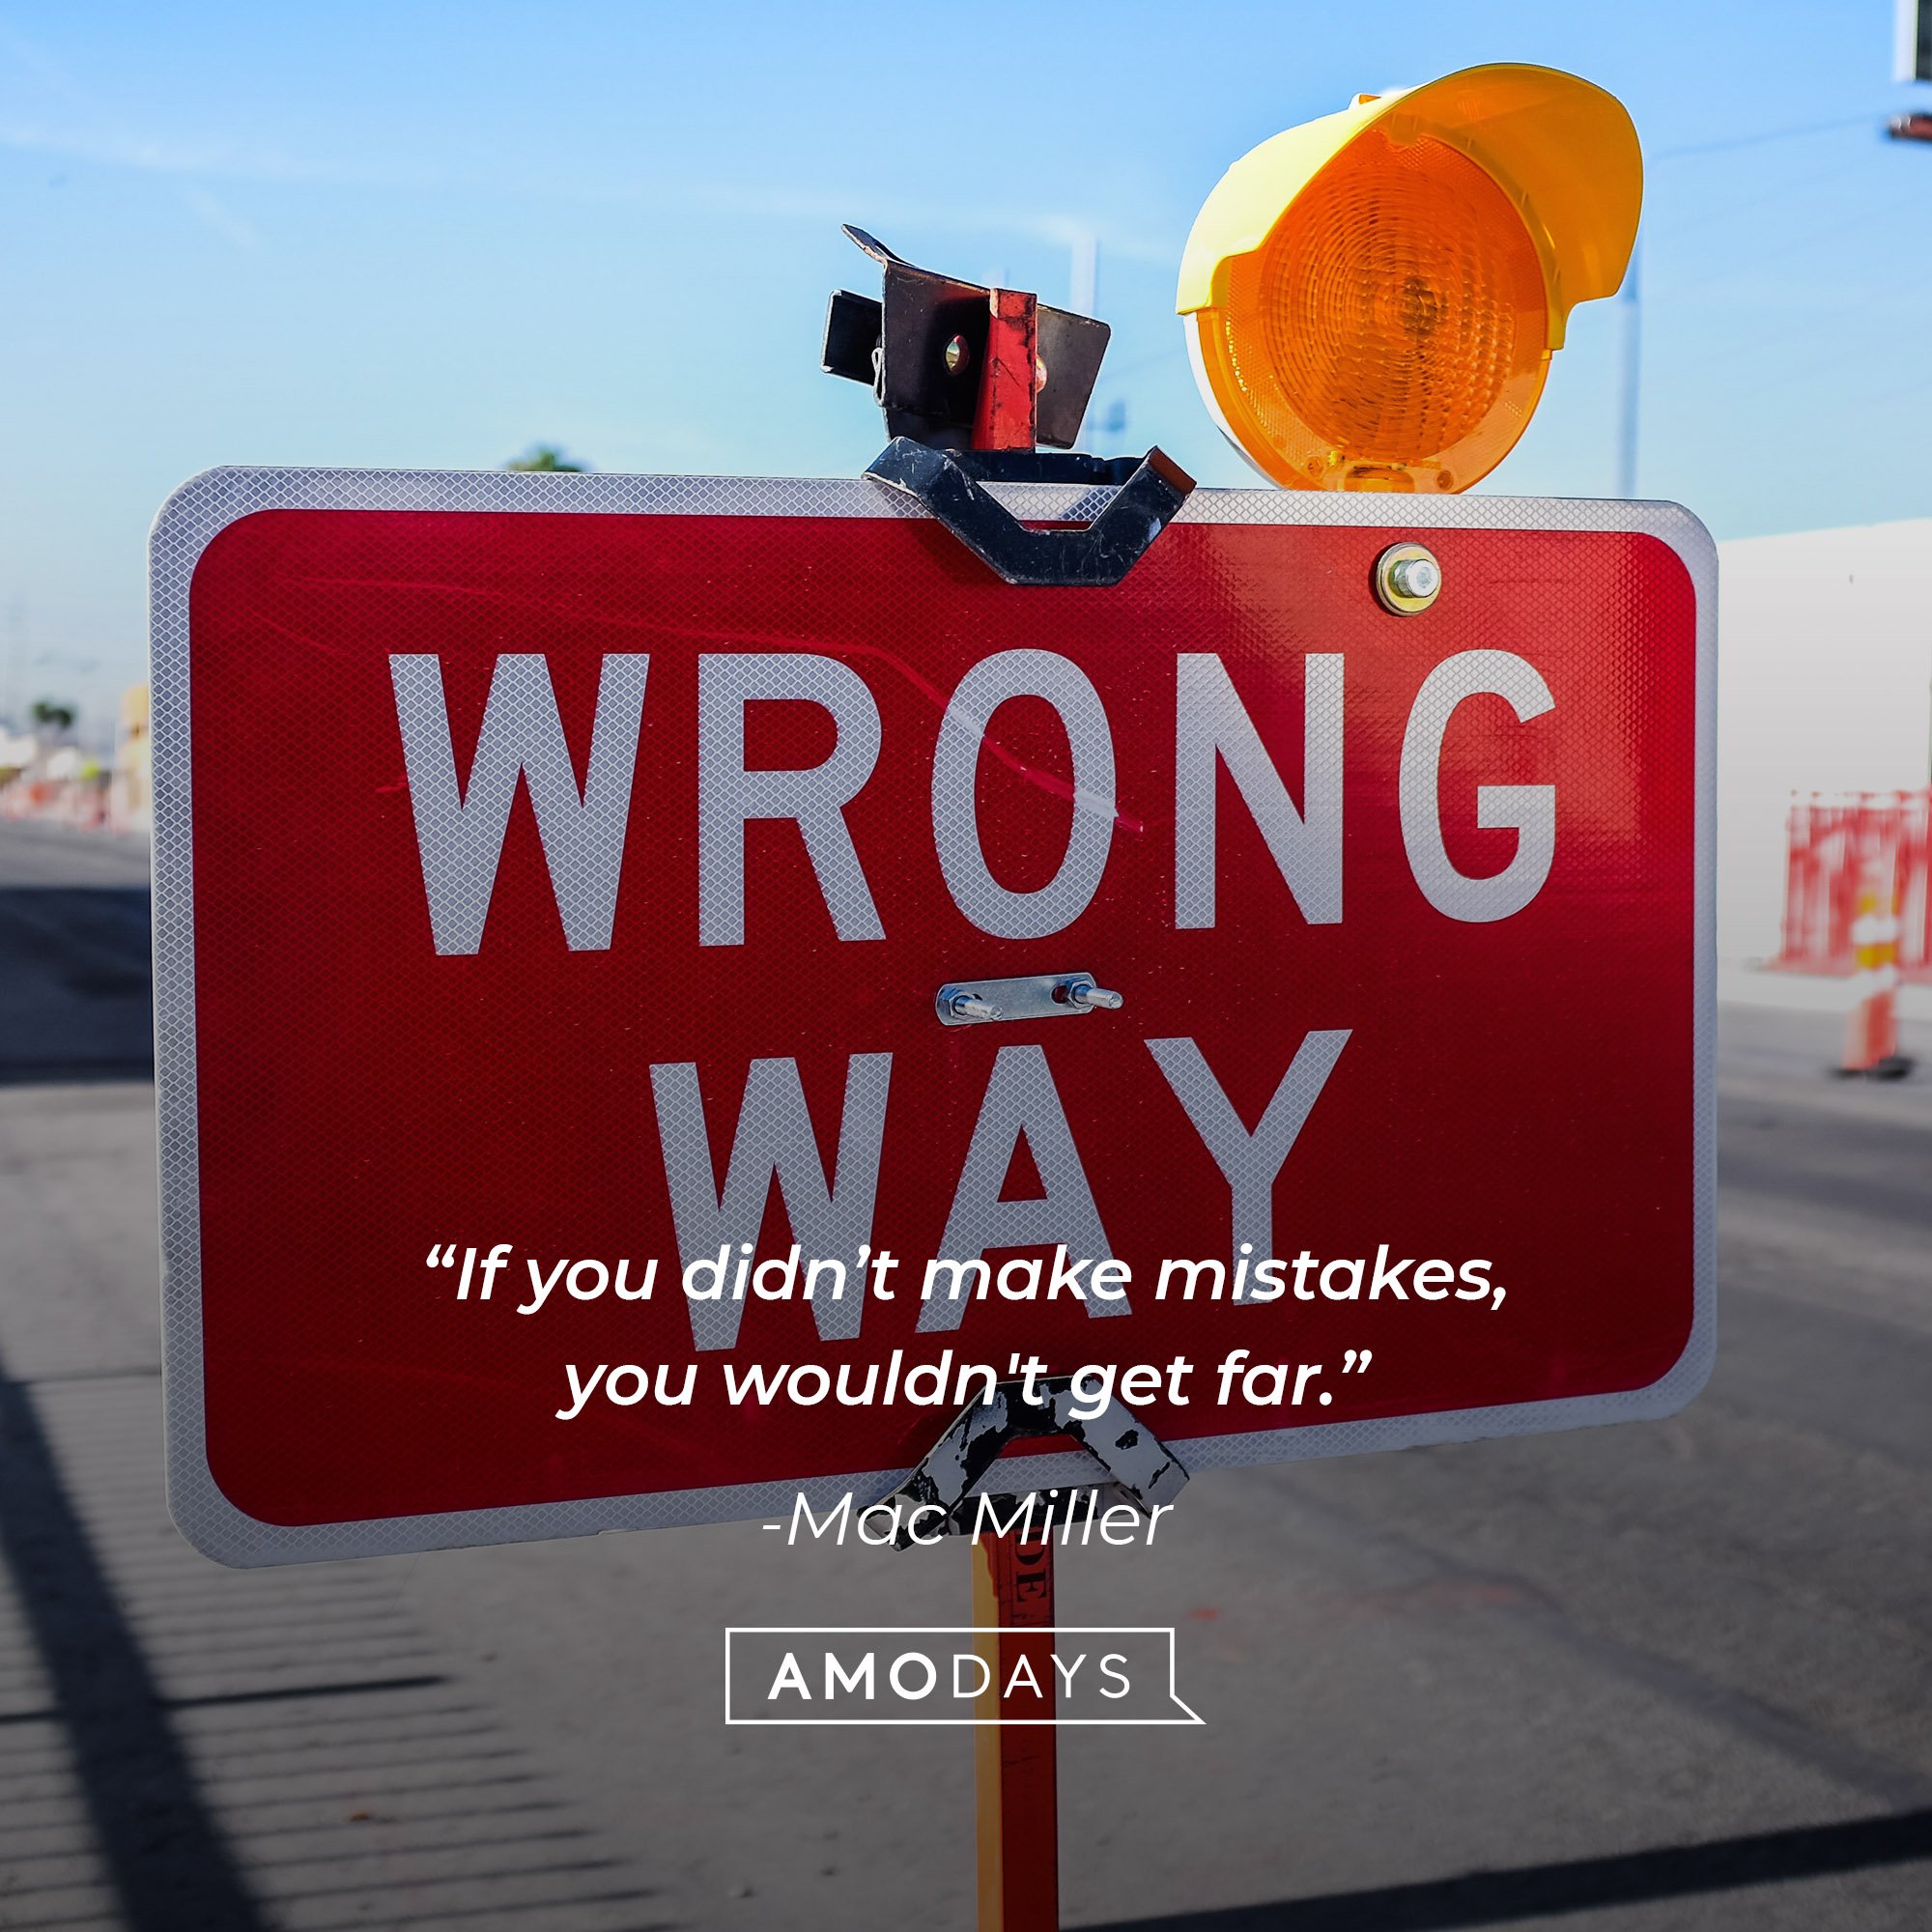 Mac Miller‘s quote: “If you didn’t make mistakes, you wouldn't get far.” │Image: AmoDays 